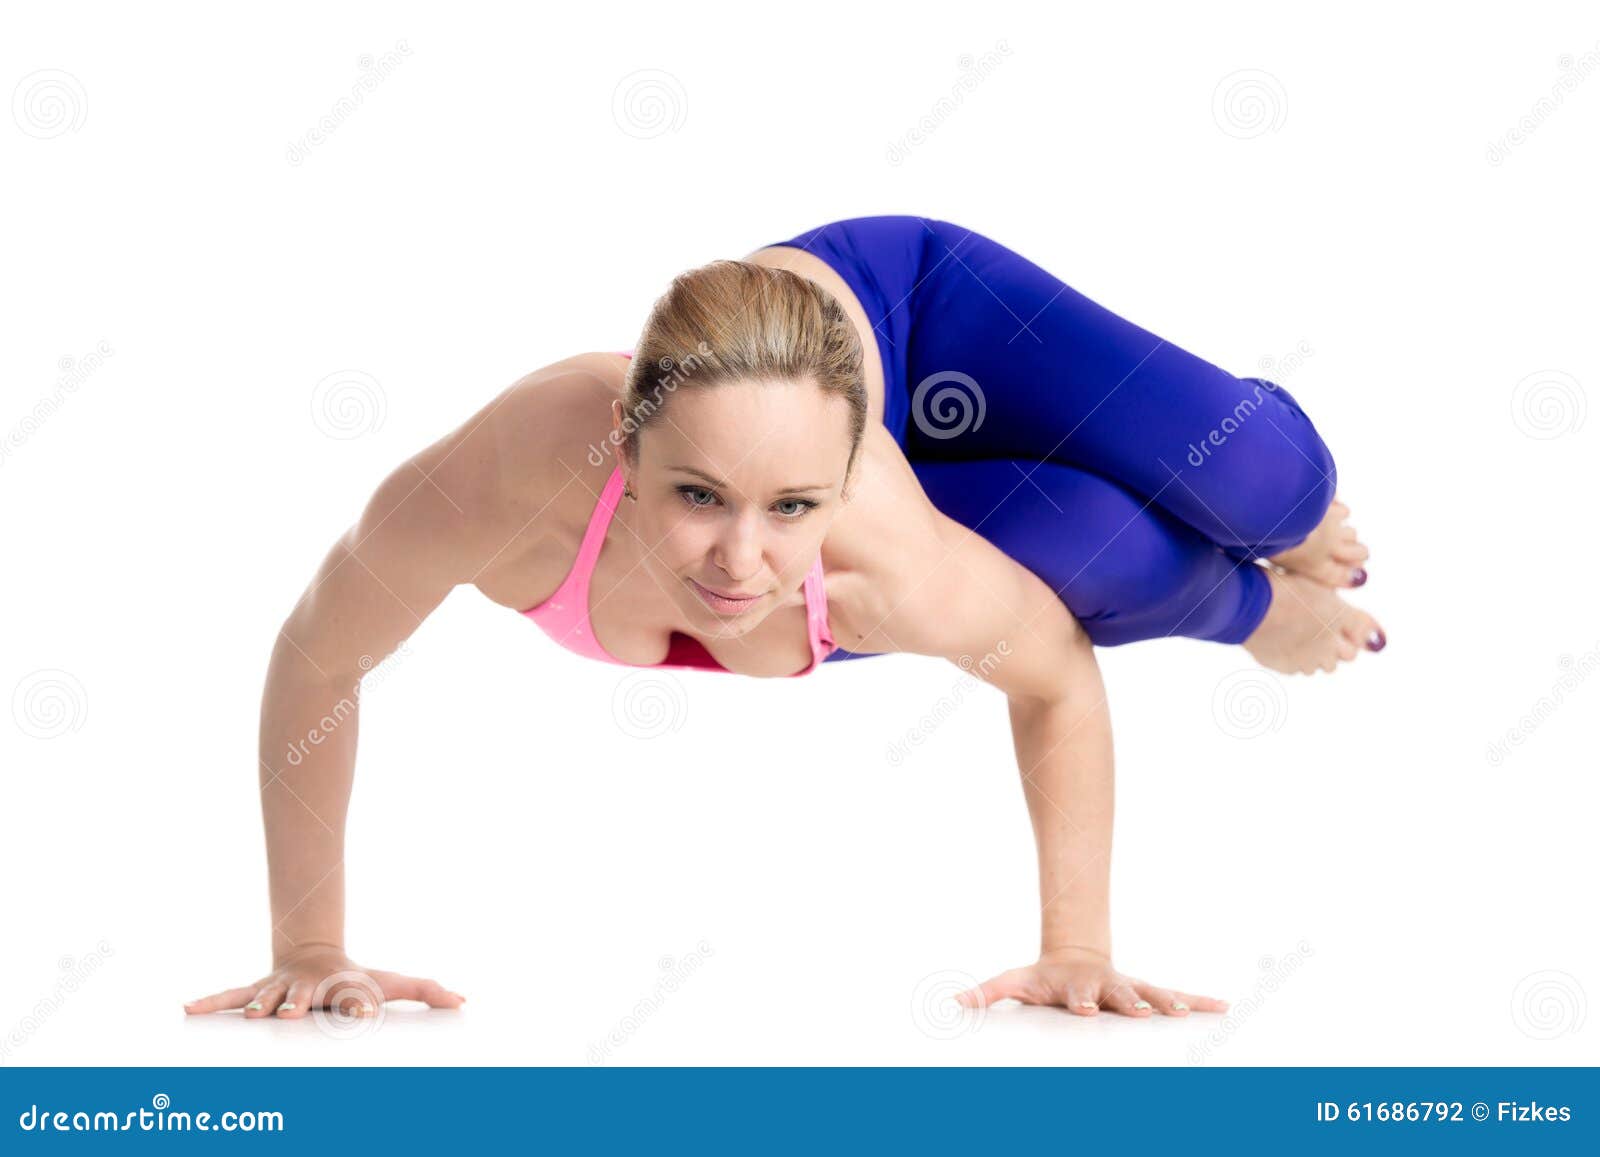 Master Crane Pose with these 10 Tips - Yoga Pose